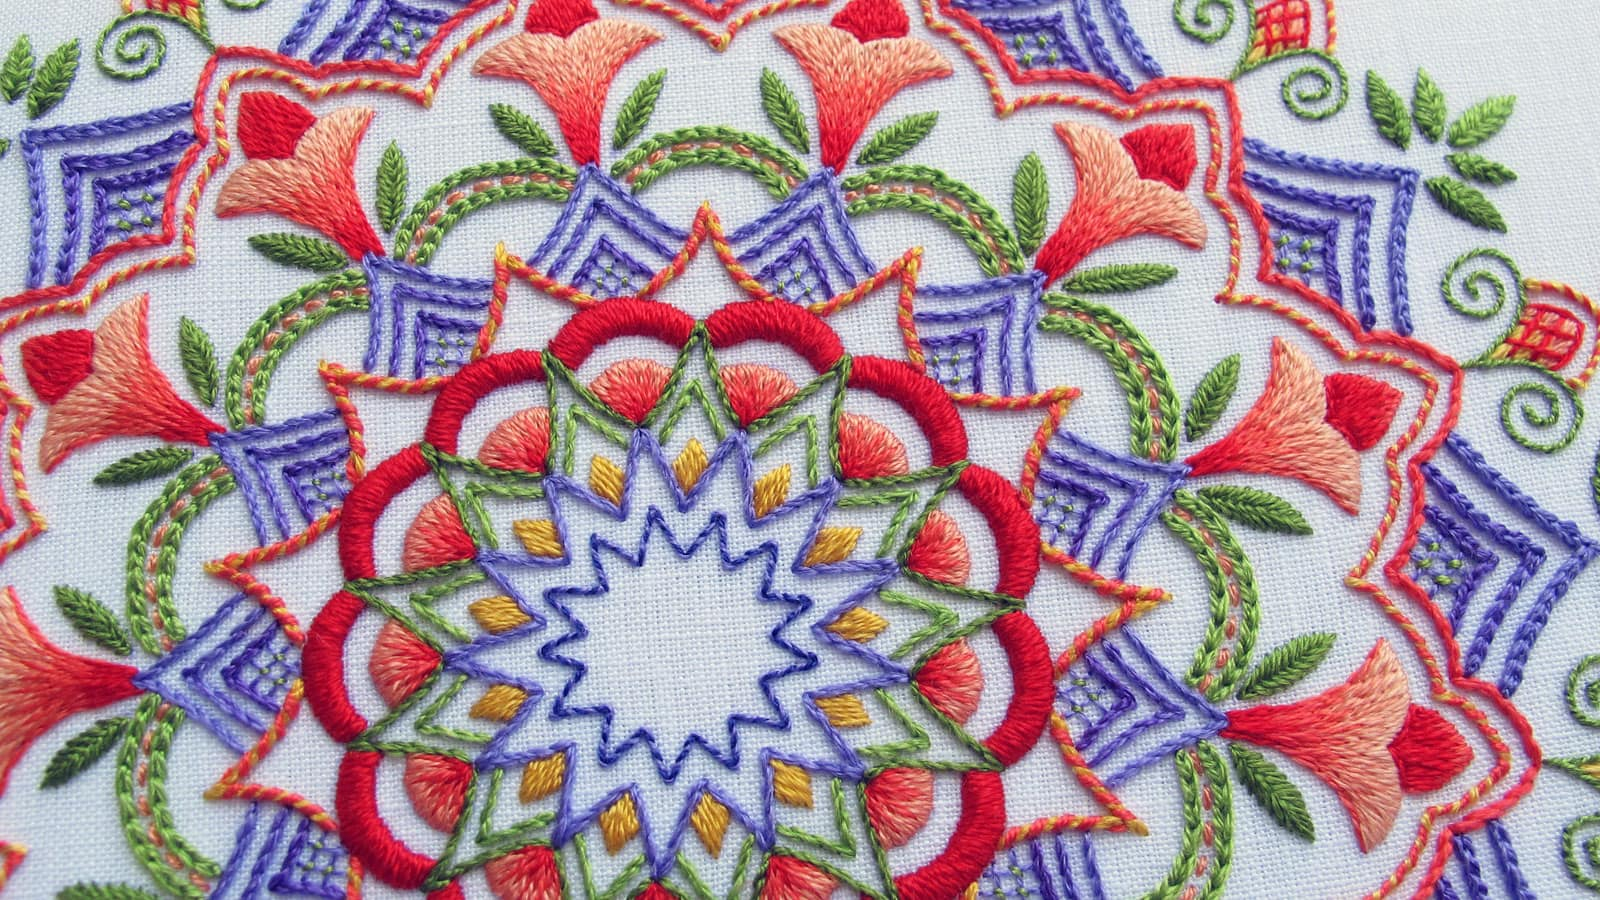 Cool Embroidery Patterns Needlenthread Tips Tricks And Great Resources For Hand Embroidery